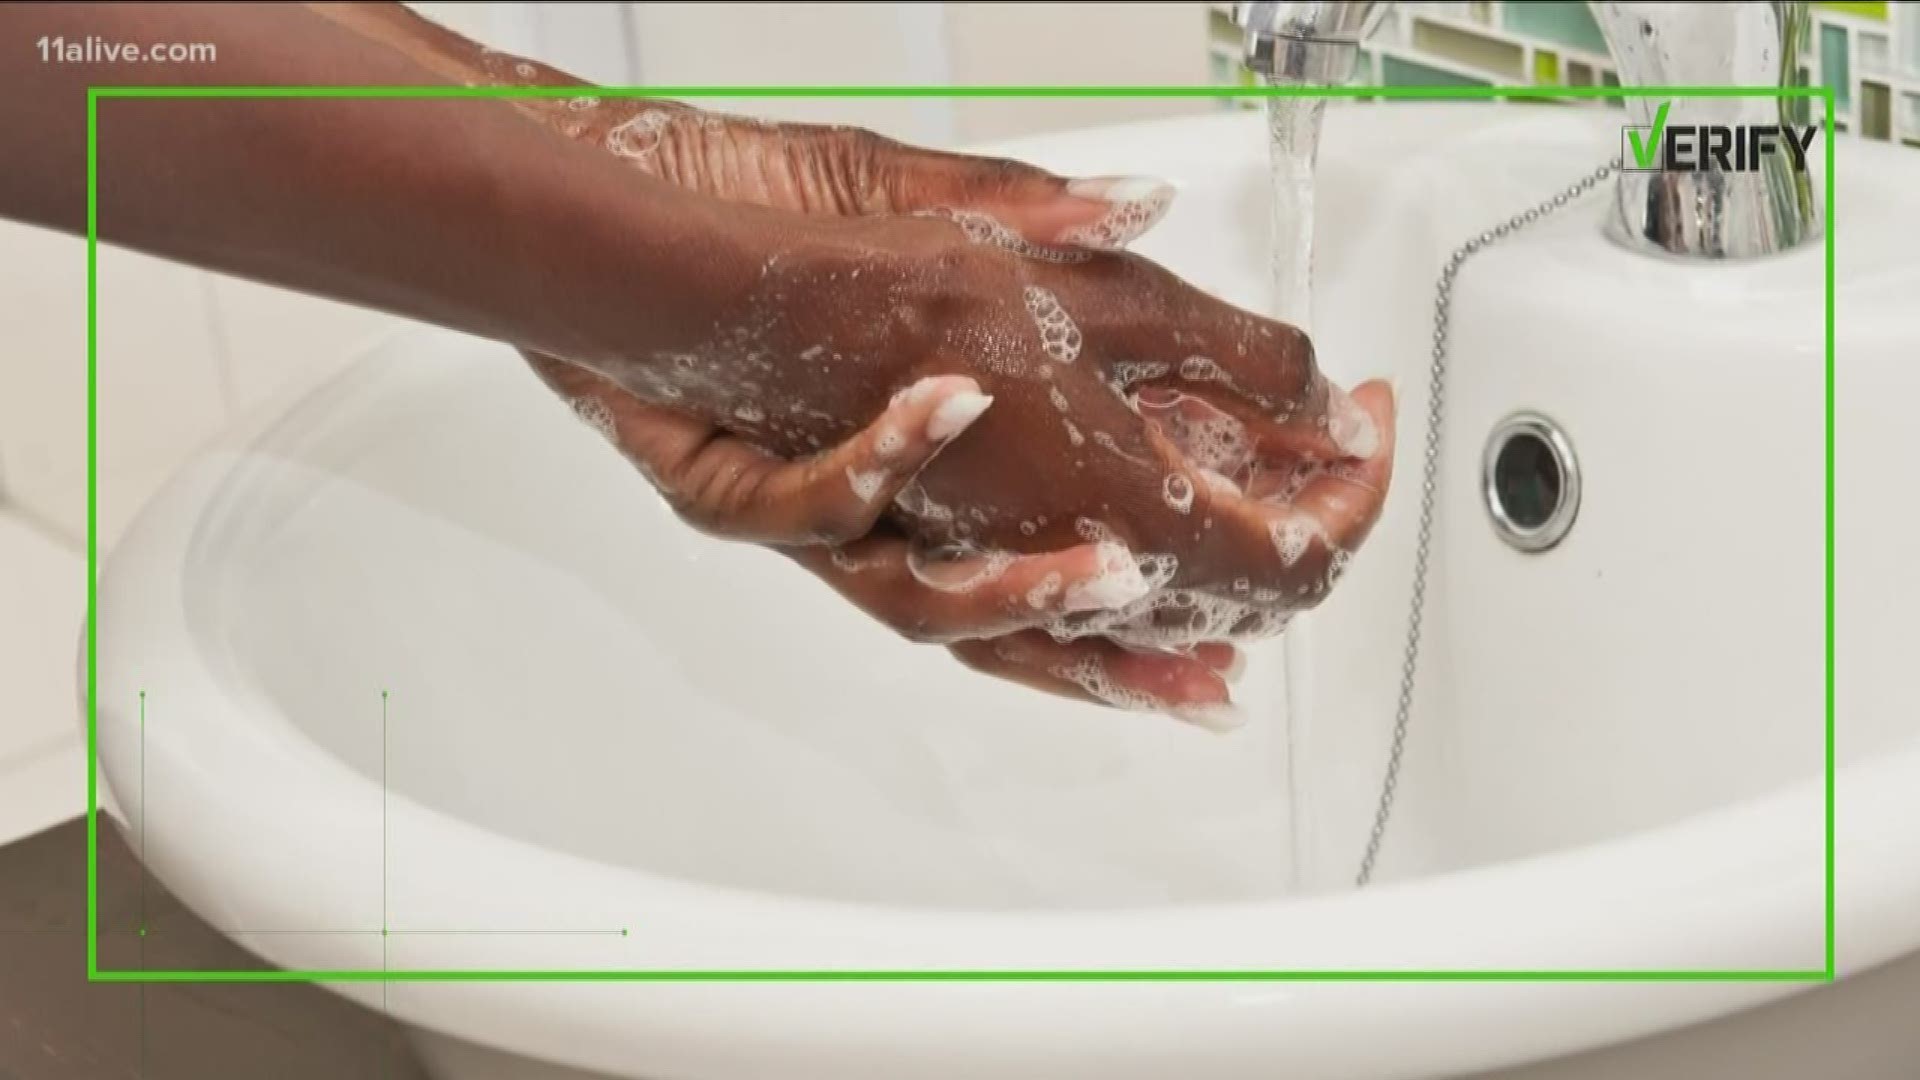 11Alive's Liza Lucas says if you wash your hands the right way...you're bound to have cleaner hands. But, can you get rid of all germ. Here's the answer.